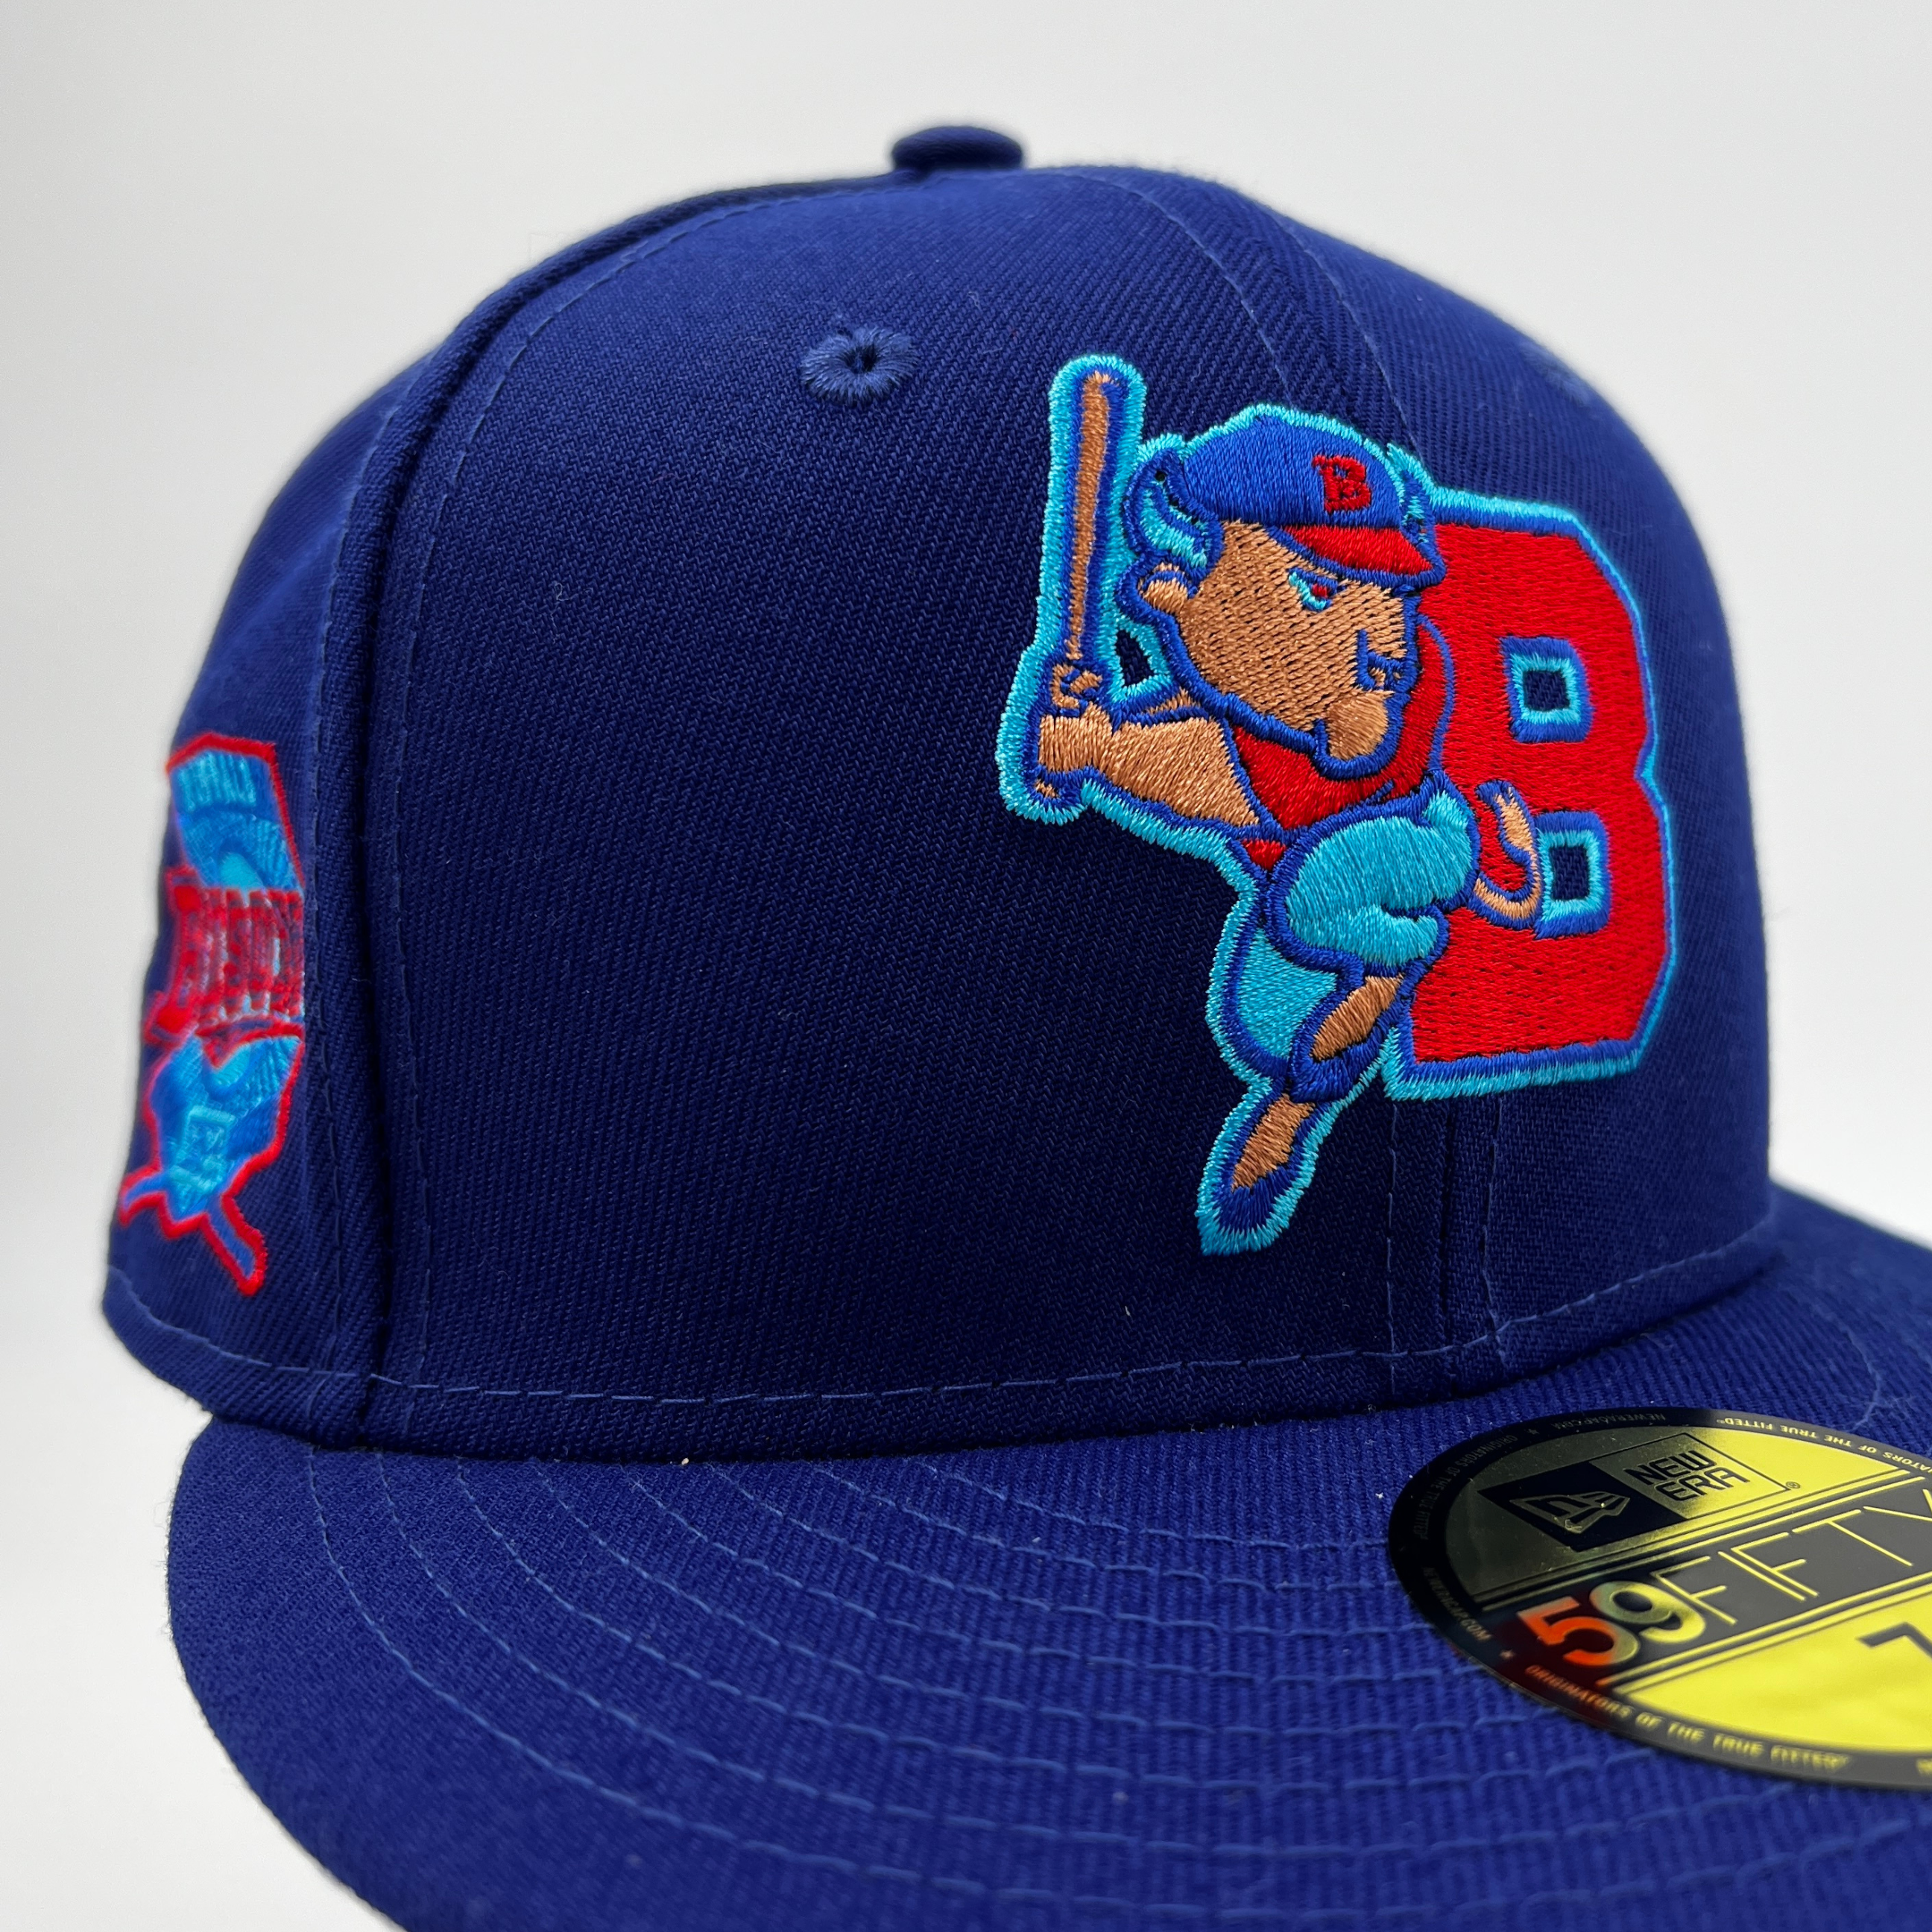 BUFFALO BISONS SUNDAY JERSEY INSPIRED NEW ERA FITTED CAP